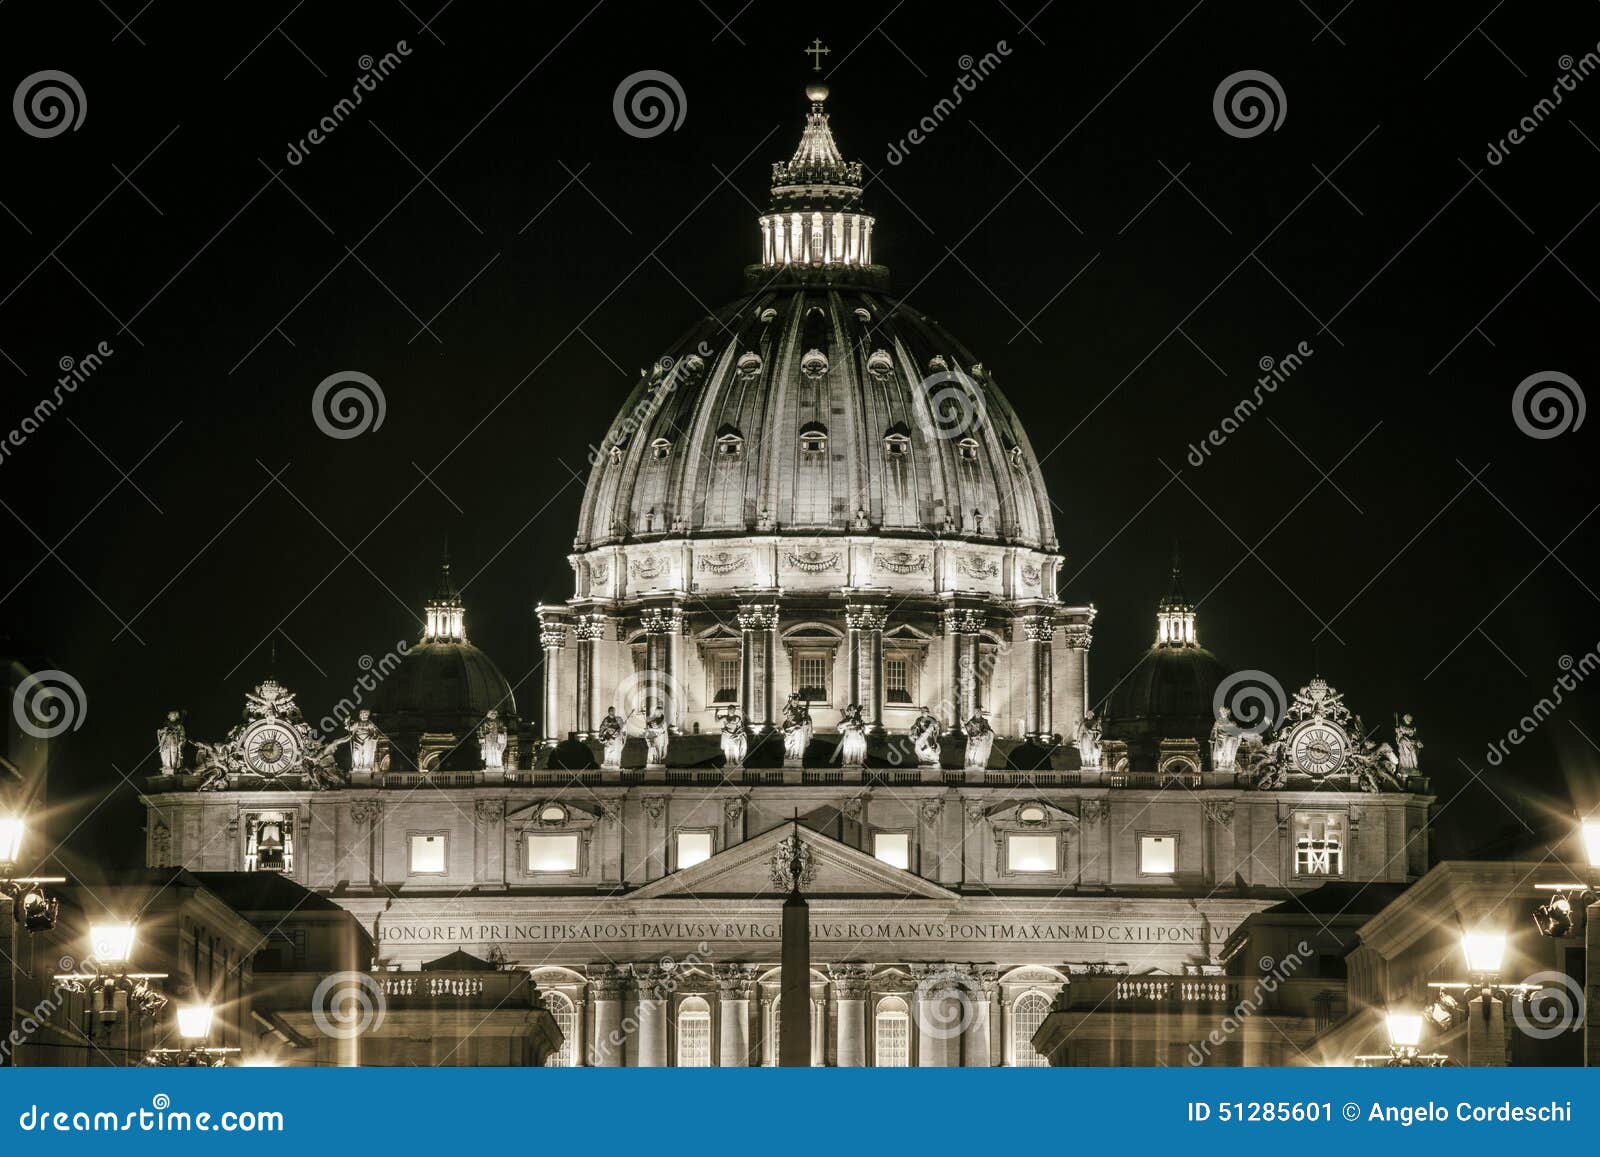 st. peters dome basilica in rome, italy. papal seat. vatican city.